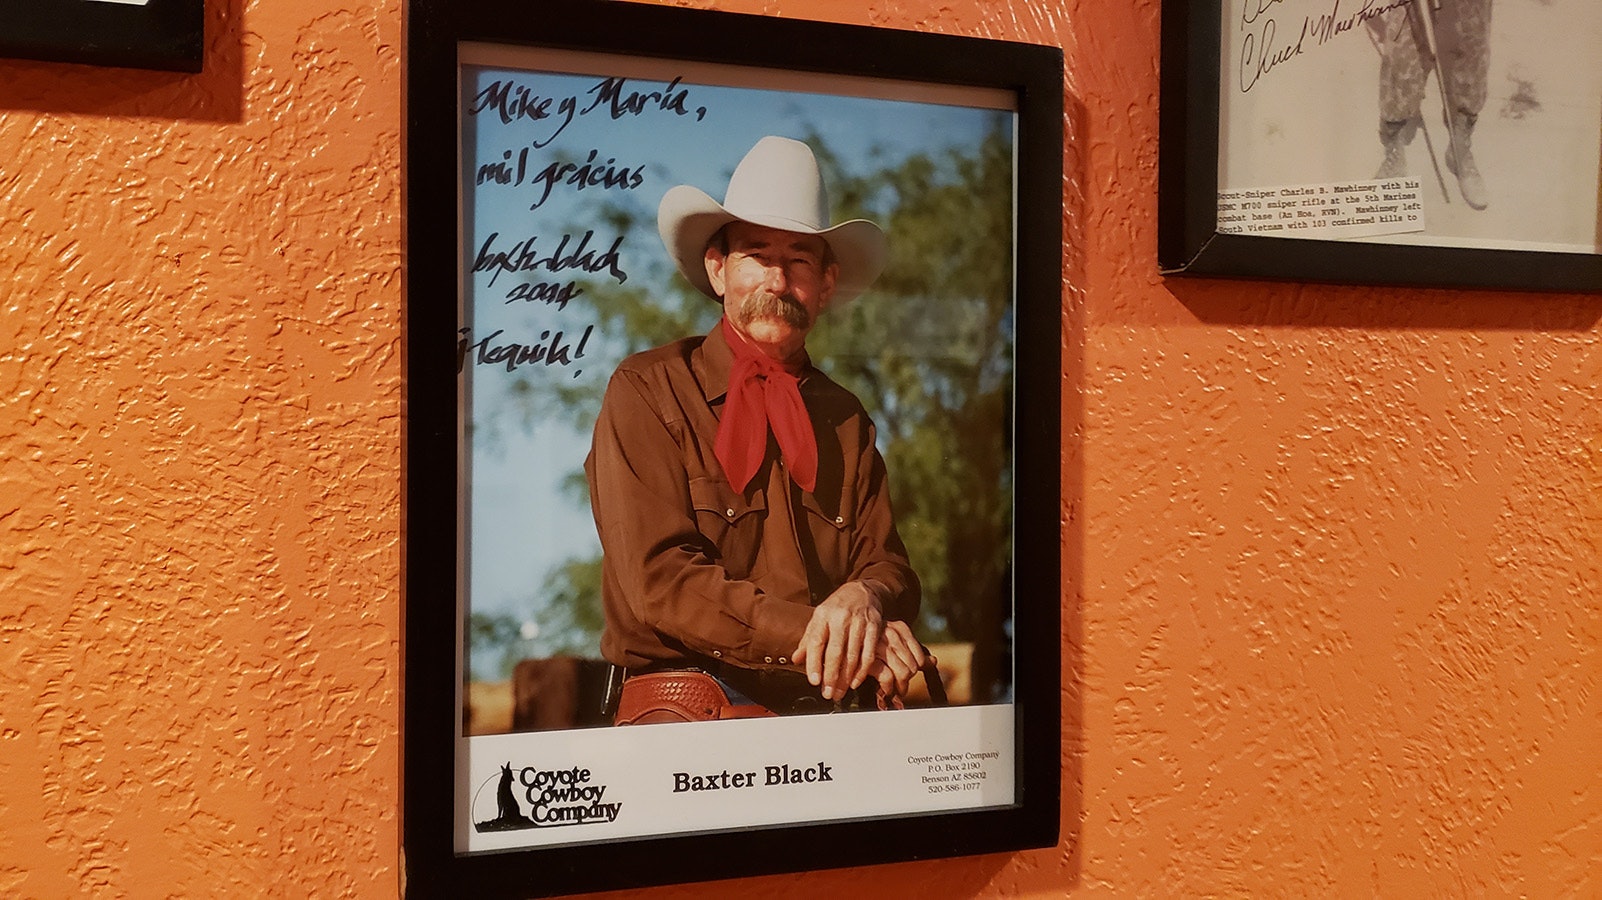 Baxter Black is among famous guests who've eaten at Big Mike's.